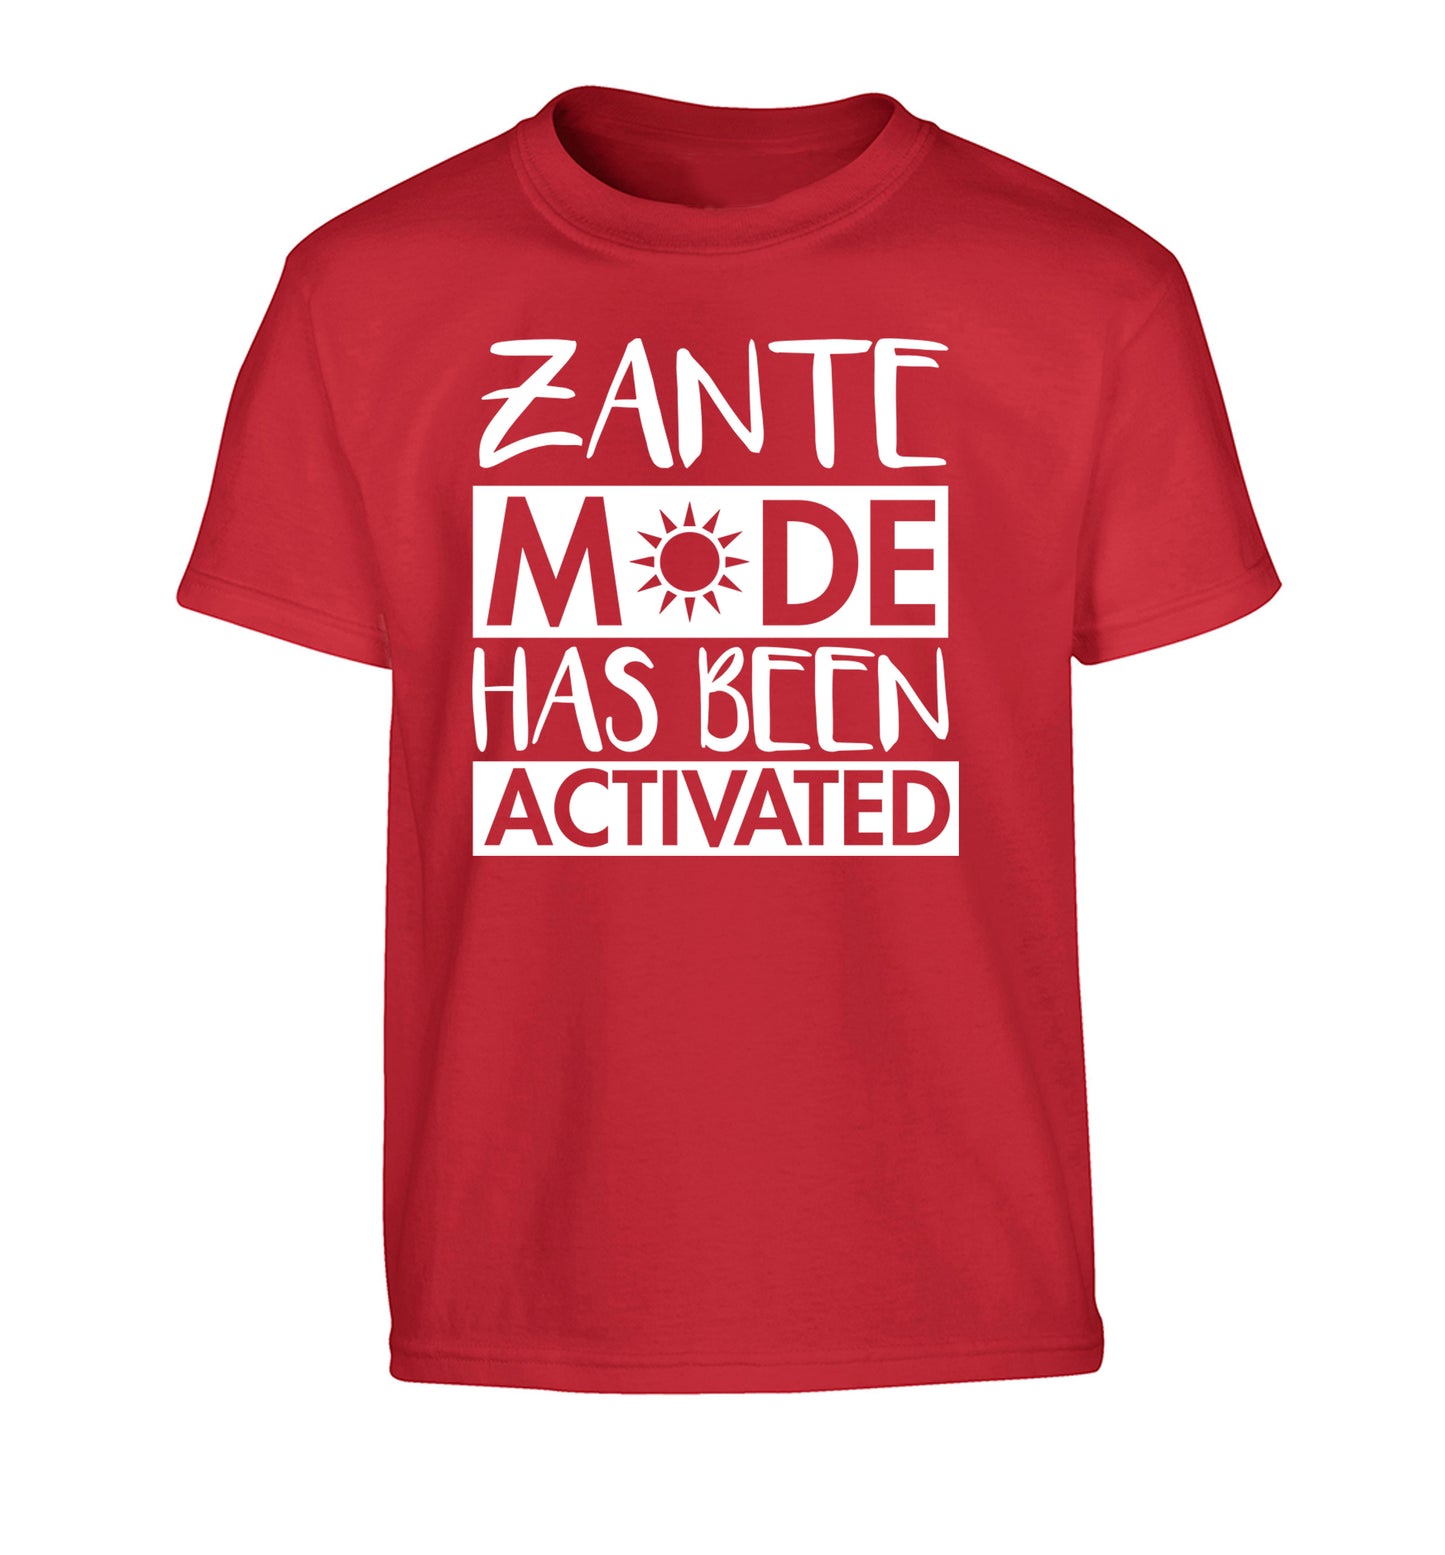 Zante mode has been activated Children's red Tshirt 12-13 Years